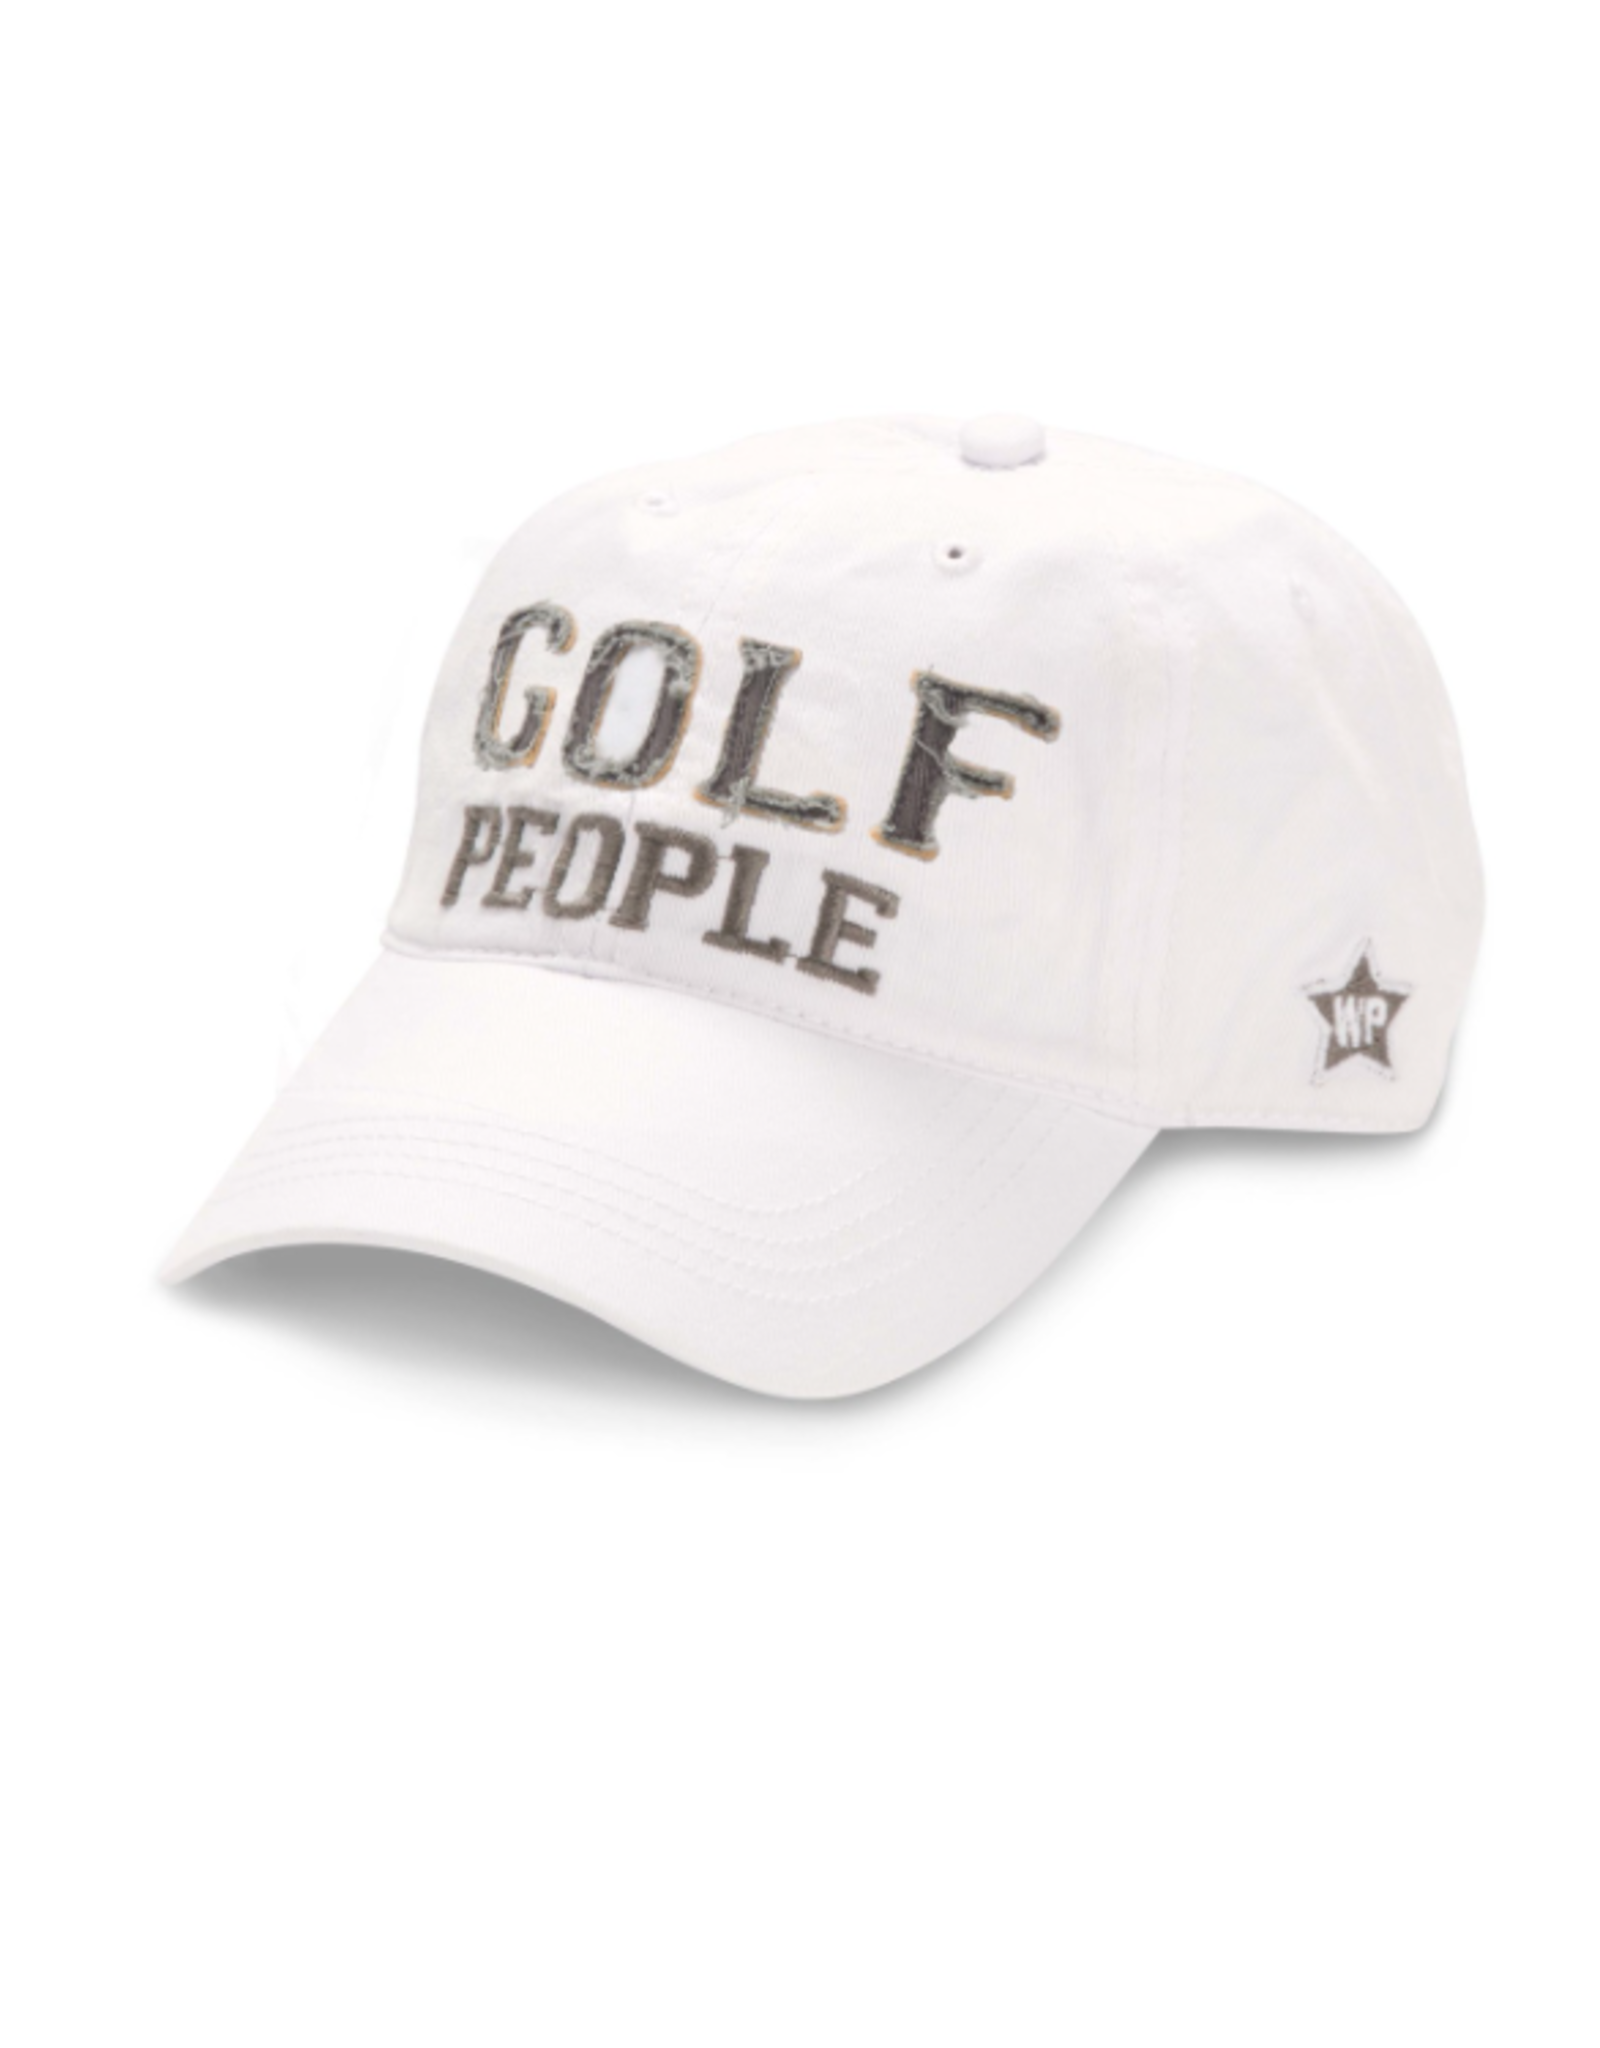 We People Golf People Ball Hat, white